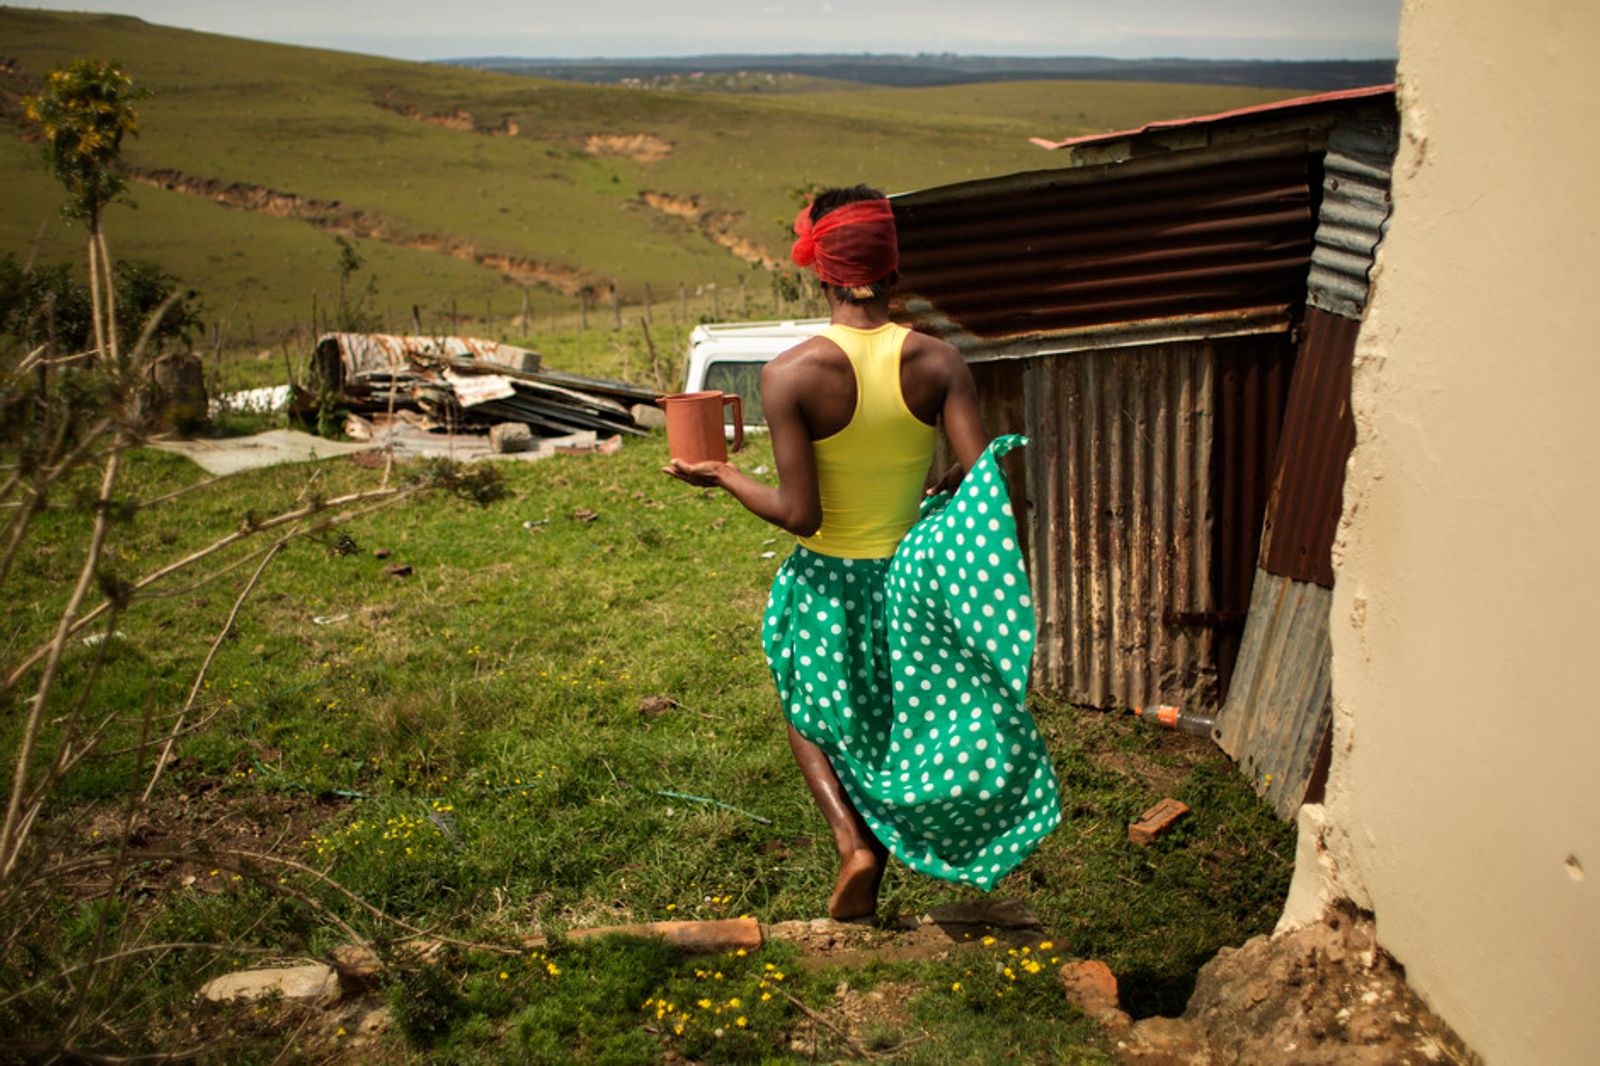 © Corinna Kern - Image from the Mama Africa photography project